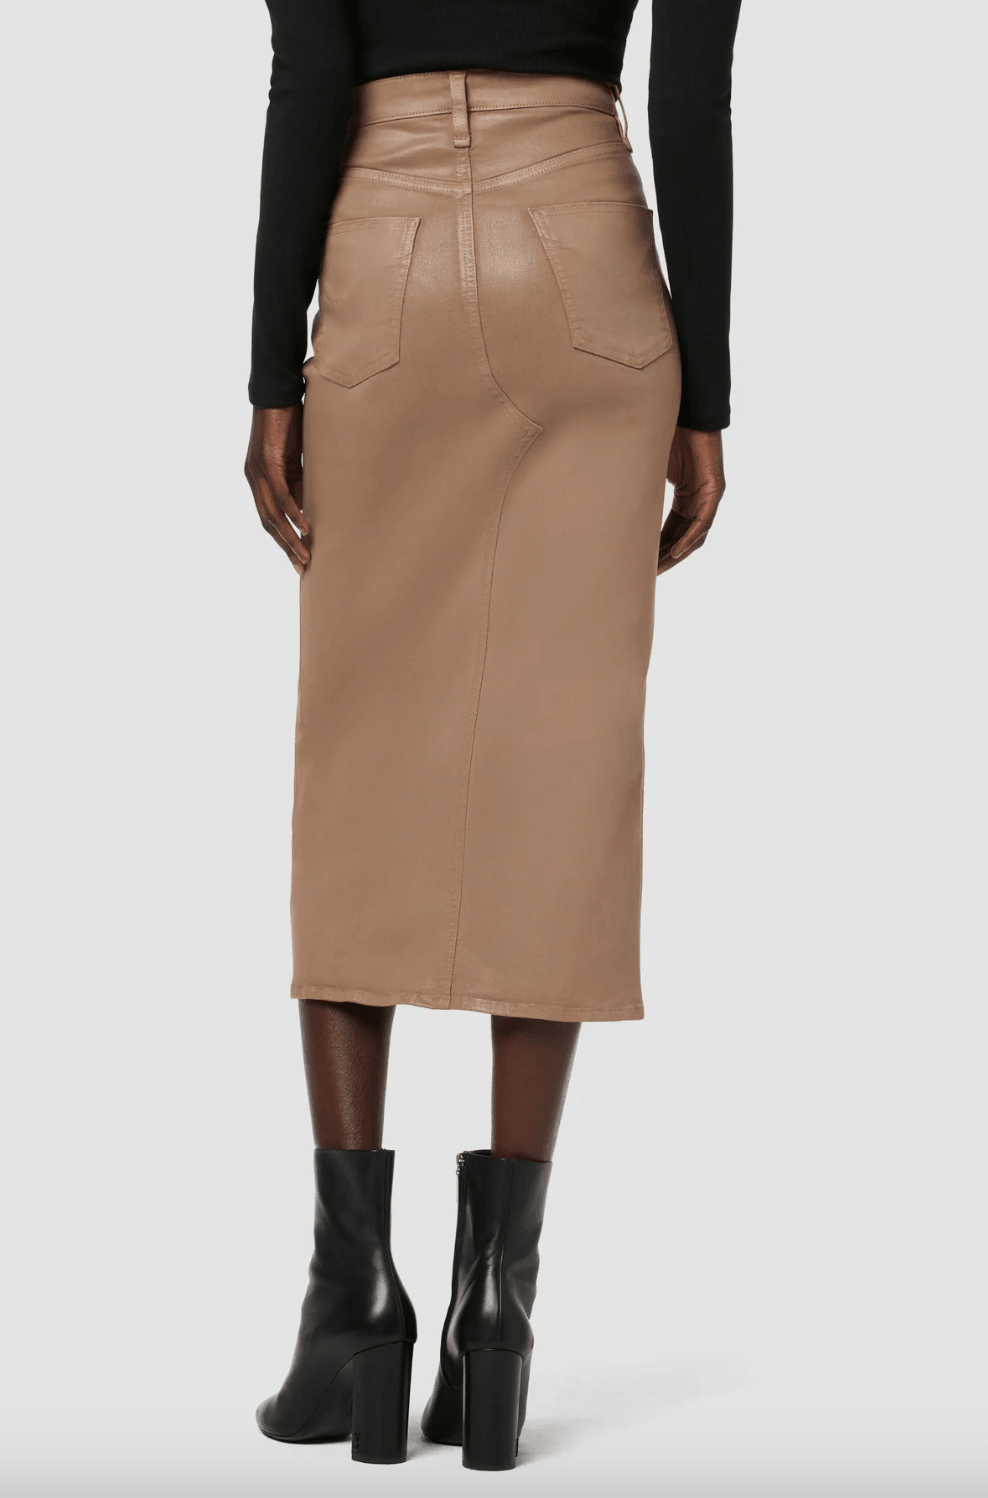 Reconstructed Midi Jean Skirt in Latte by Hudson - Haven